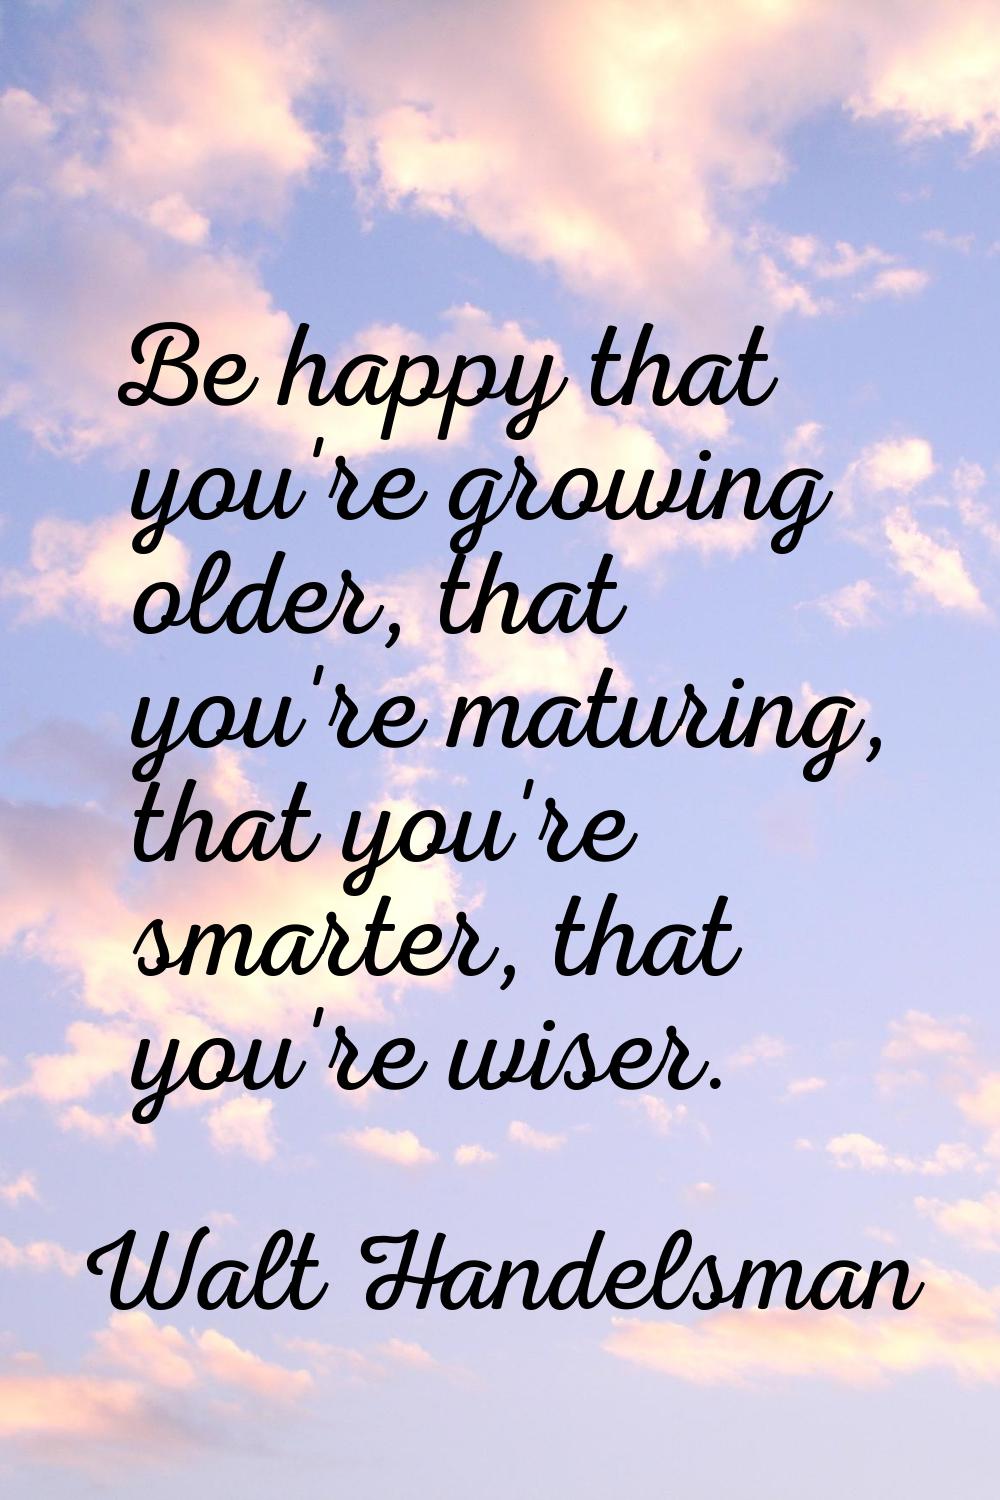 Be happy that you're growing older, that you're maturing, that you're smarter, that you're wiser.